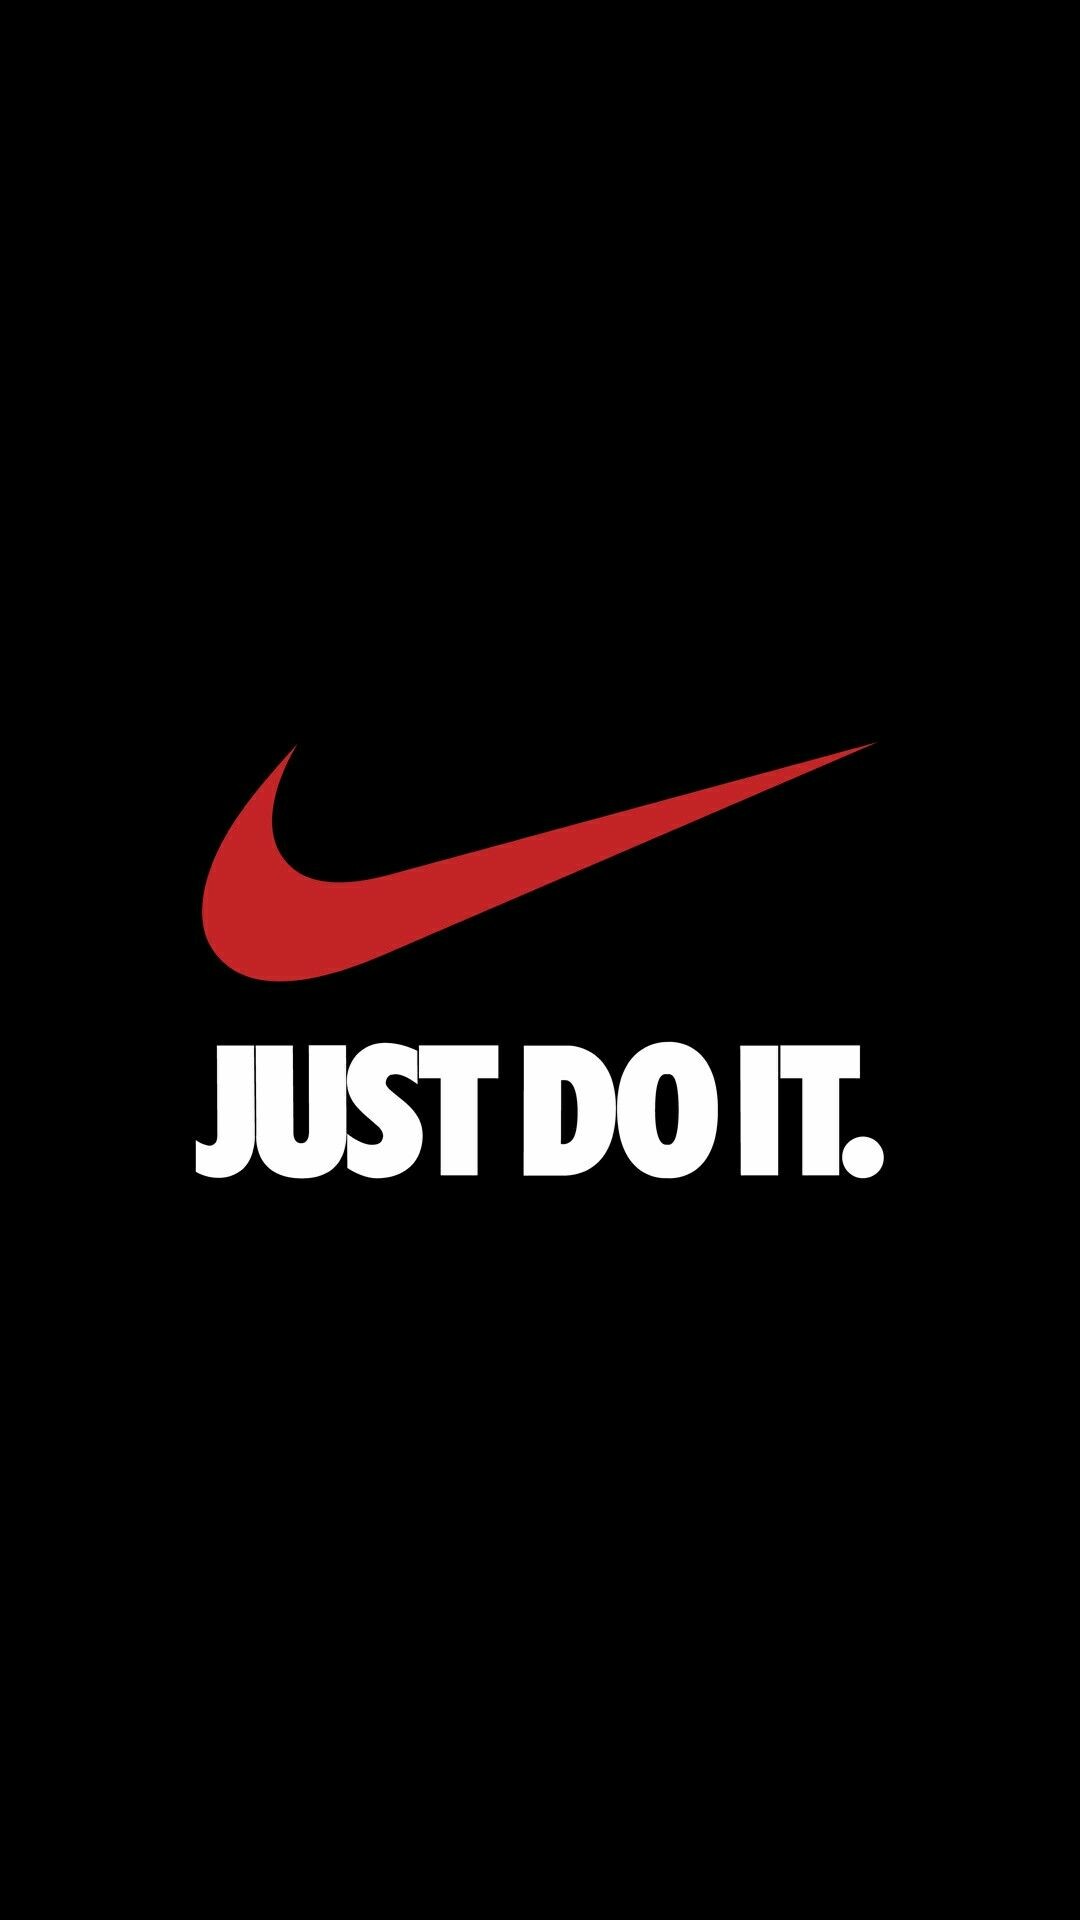 Nike: The world's largest supplier and manufacturer of athletic shoes, Just Do It. 1080x1920 Full HD Background.